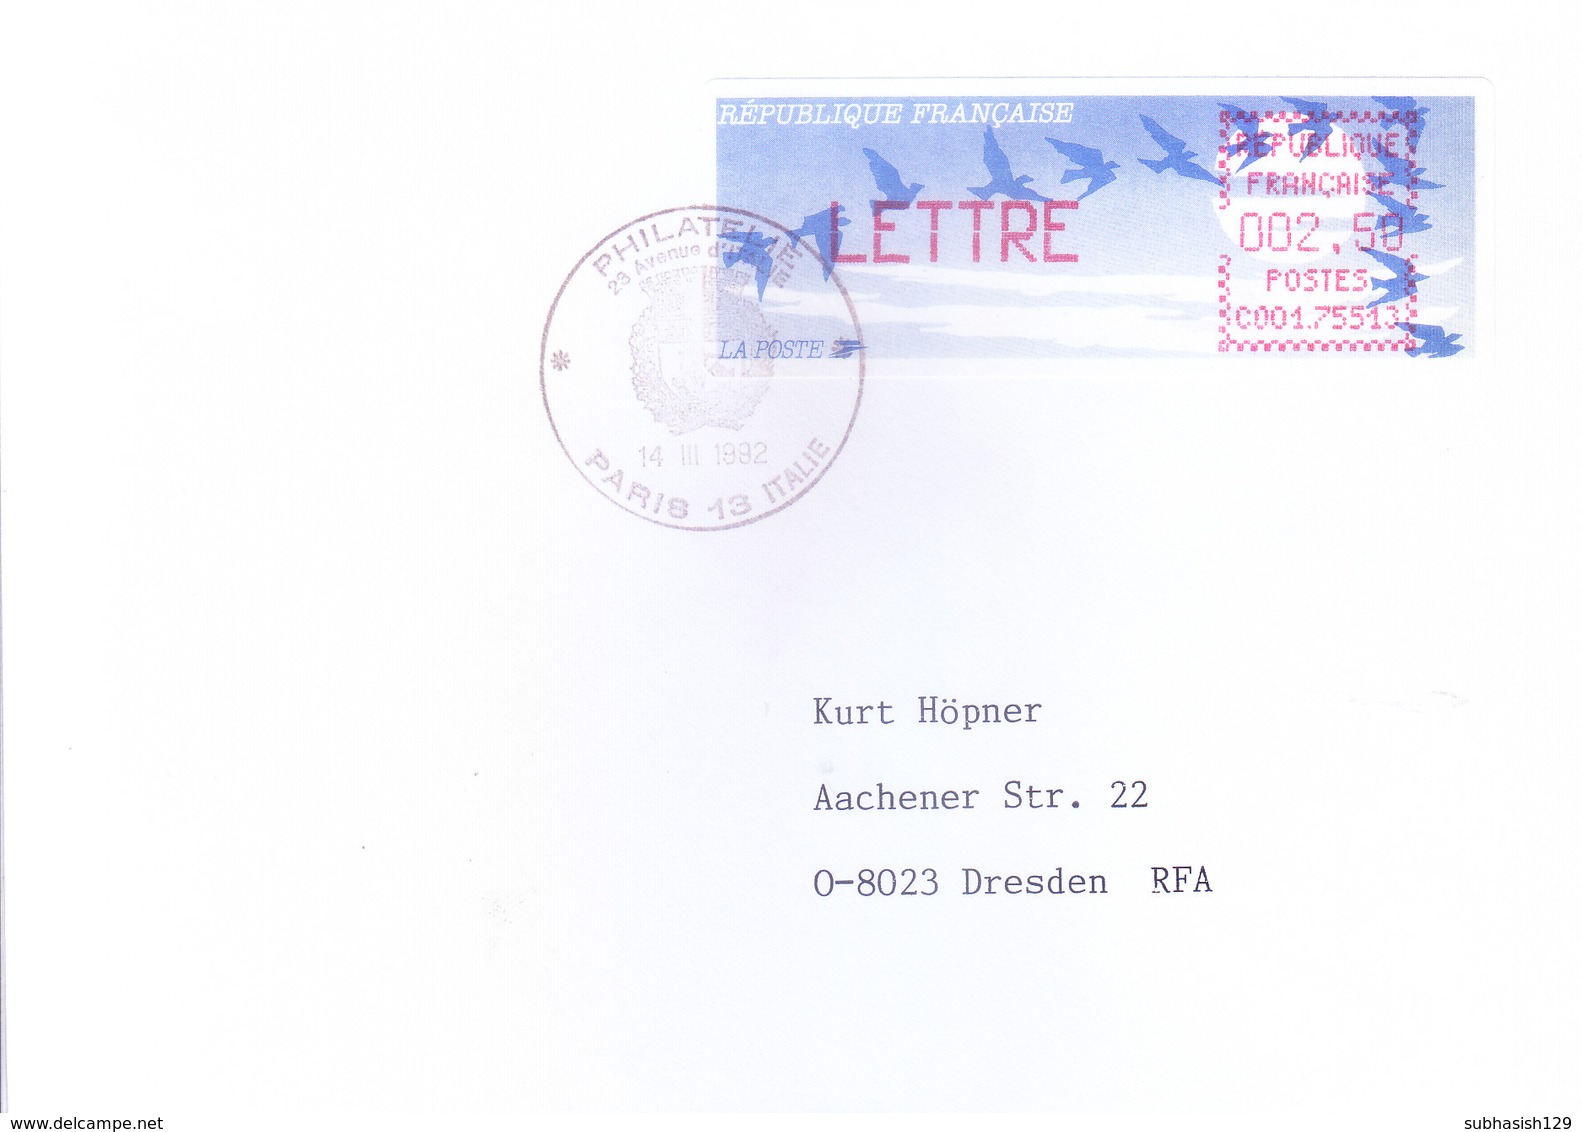 FRANCE : OFFICIAL METER FRANKED POSTAL LABLE WITH CANCELLATION : YEAR 1992 : ISSUED FROM PARIS - Covers & Documents